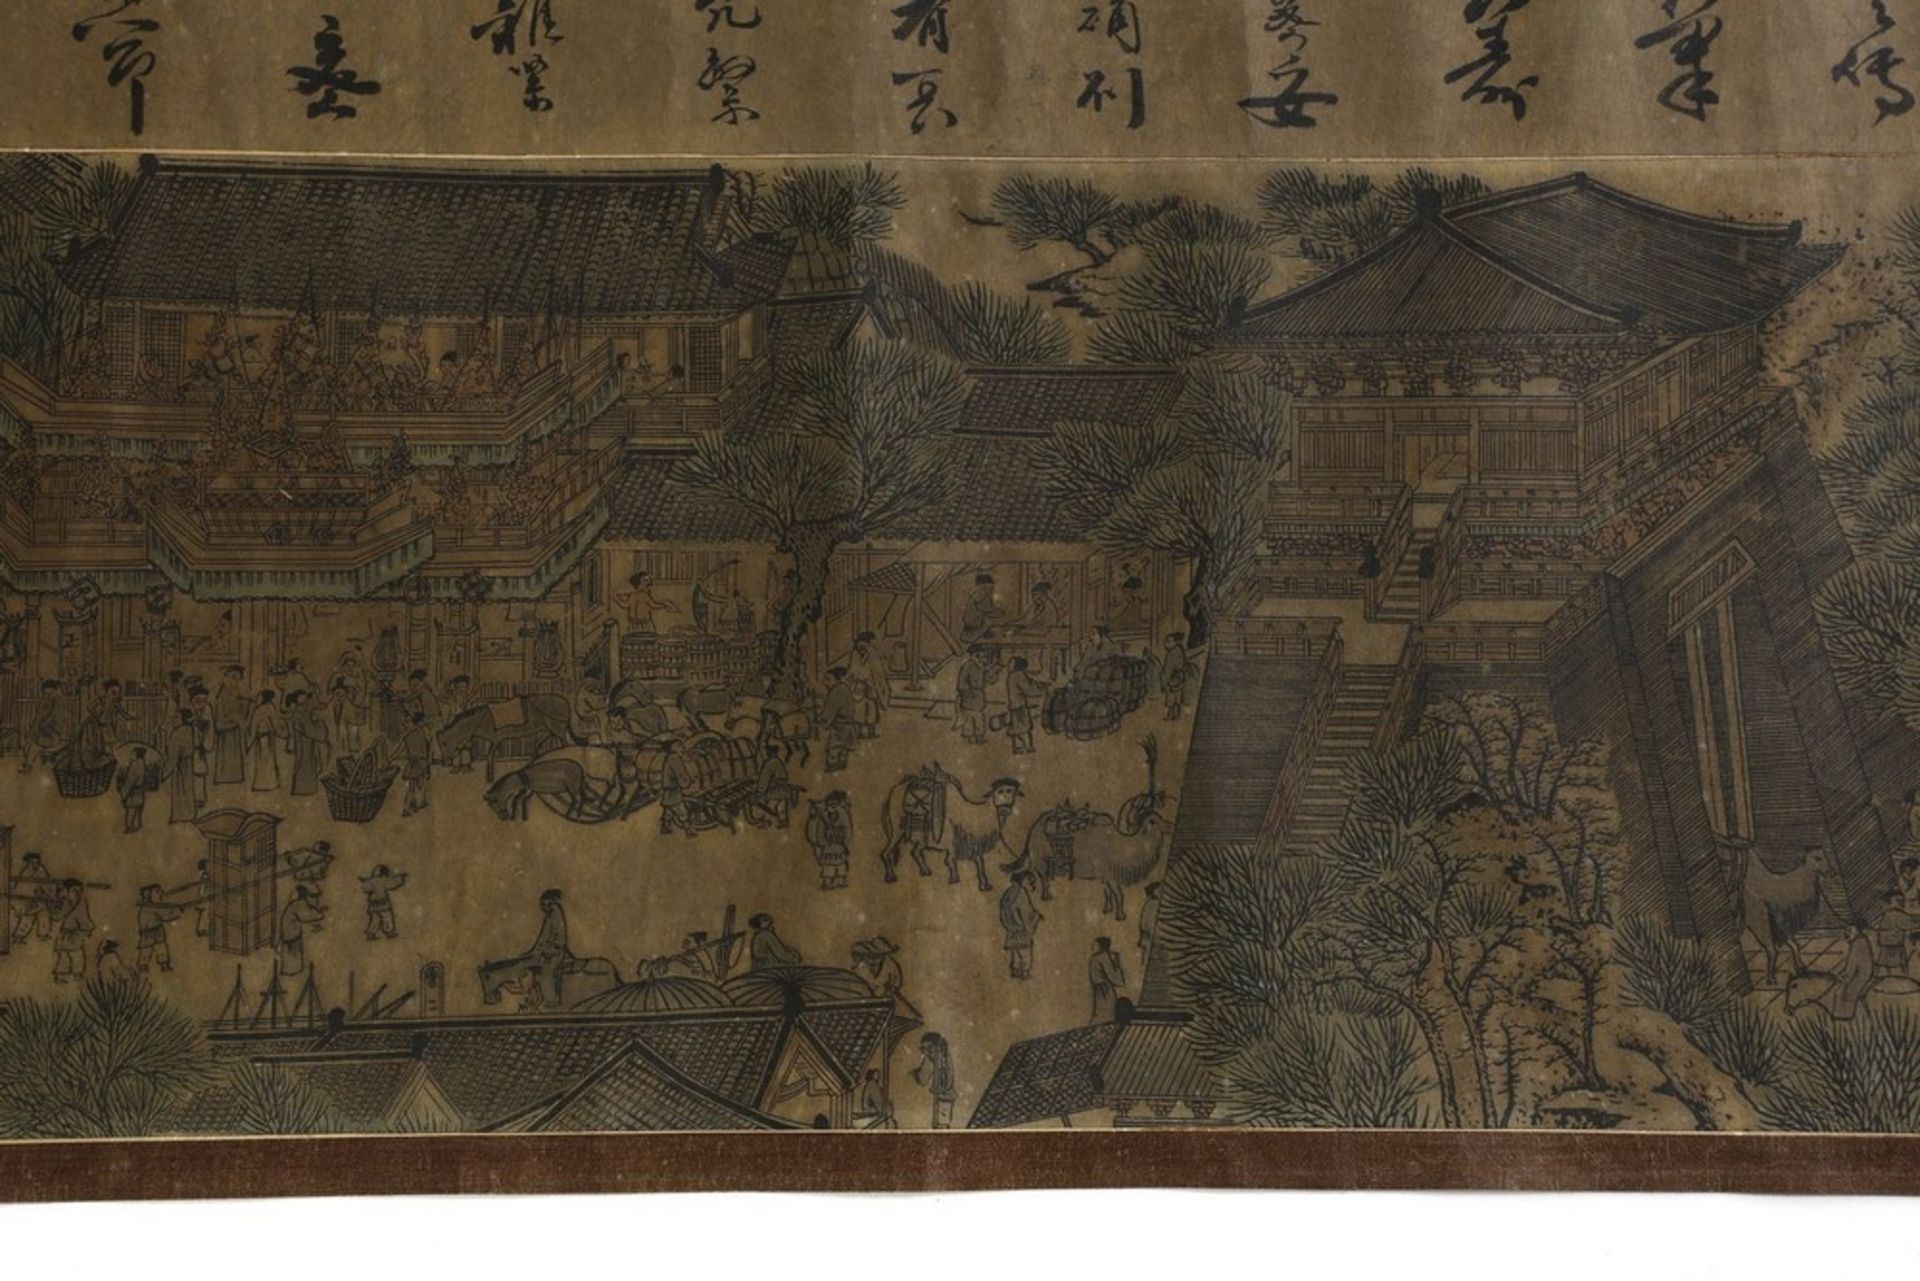 Arte Cinese A very long scroll on paper with a copy of Zhang Zeduan famous painting China, 20th cen - Image 8 of 11